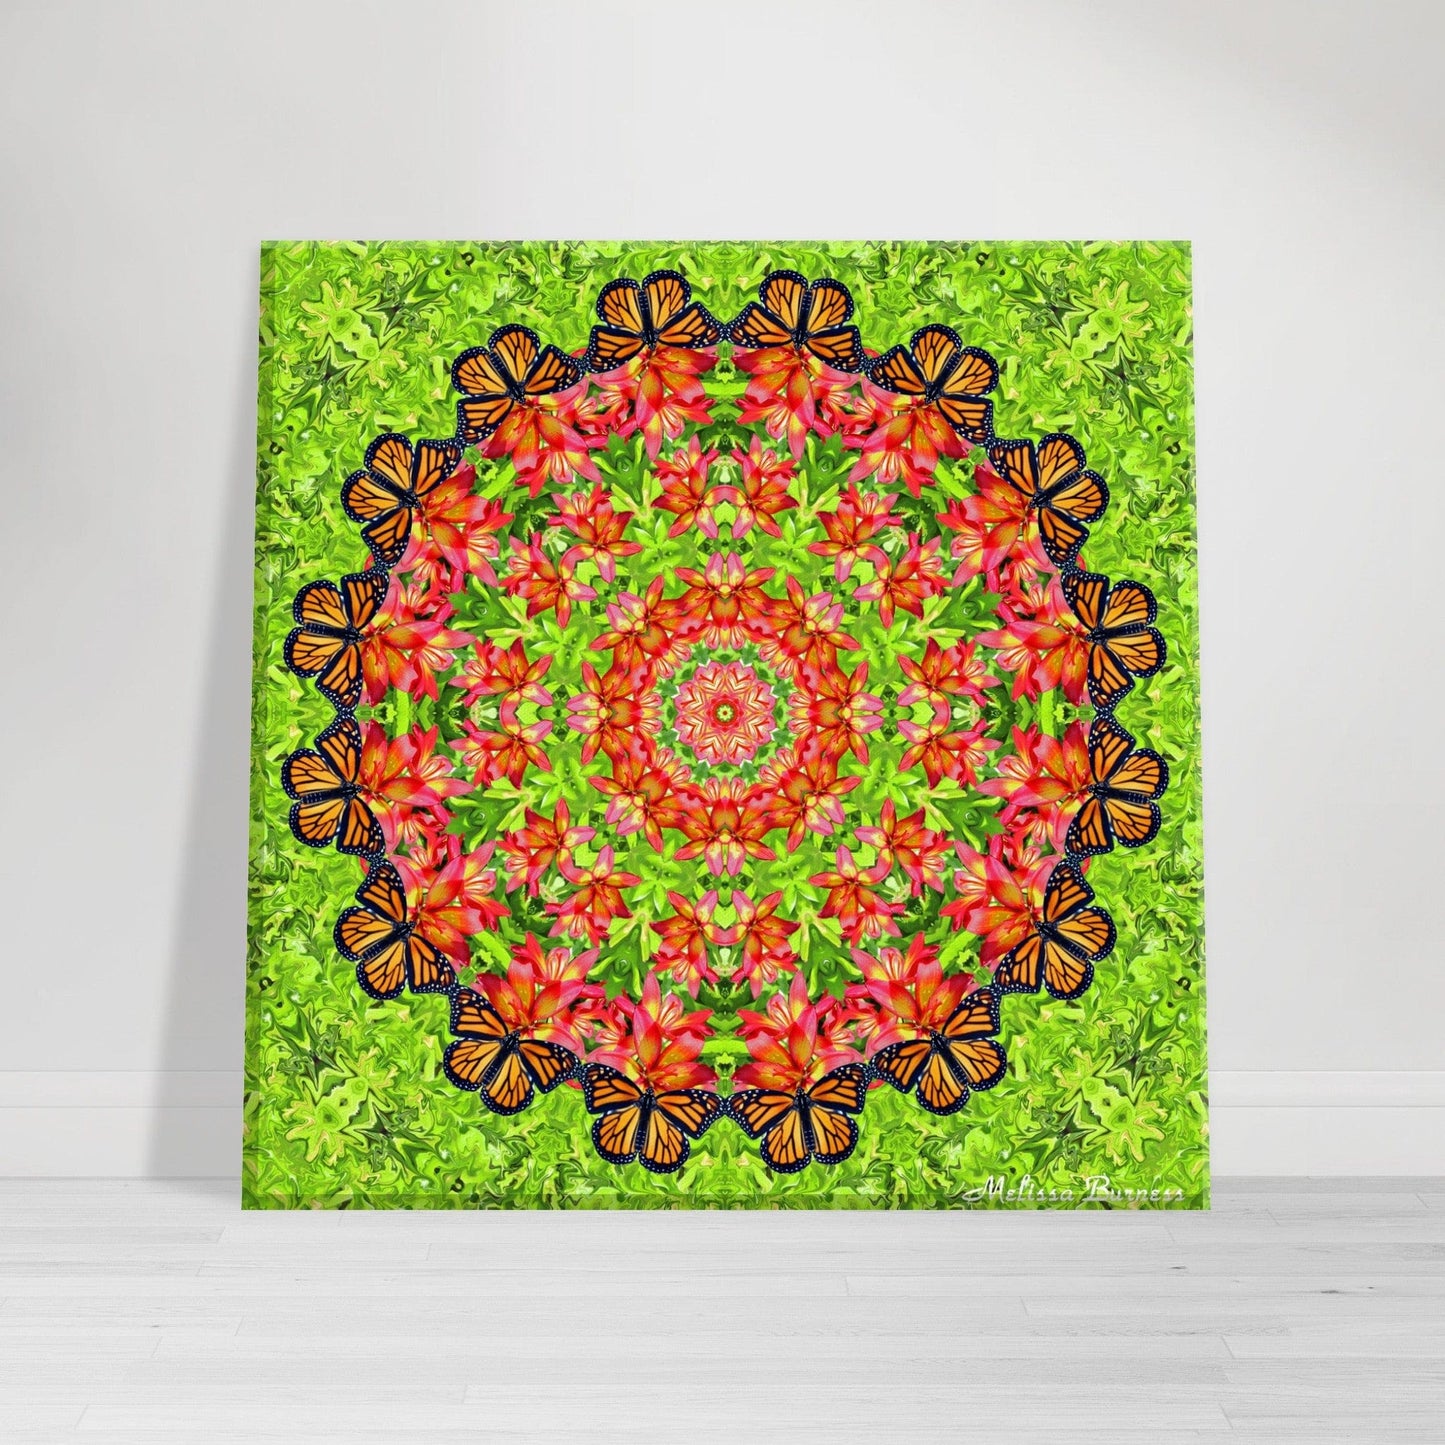 Abstract Eclectic Butterfly Wall Art - Enchanting Cottagecore Nature Mandala Art On Canvas Print Ornate Orbit